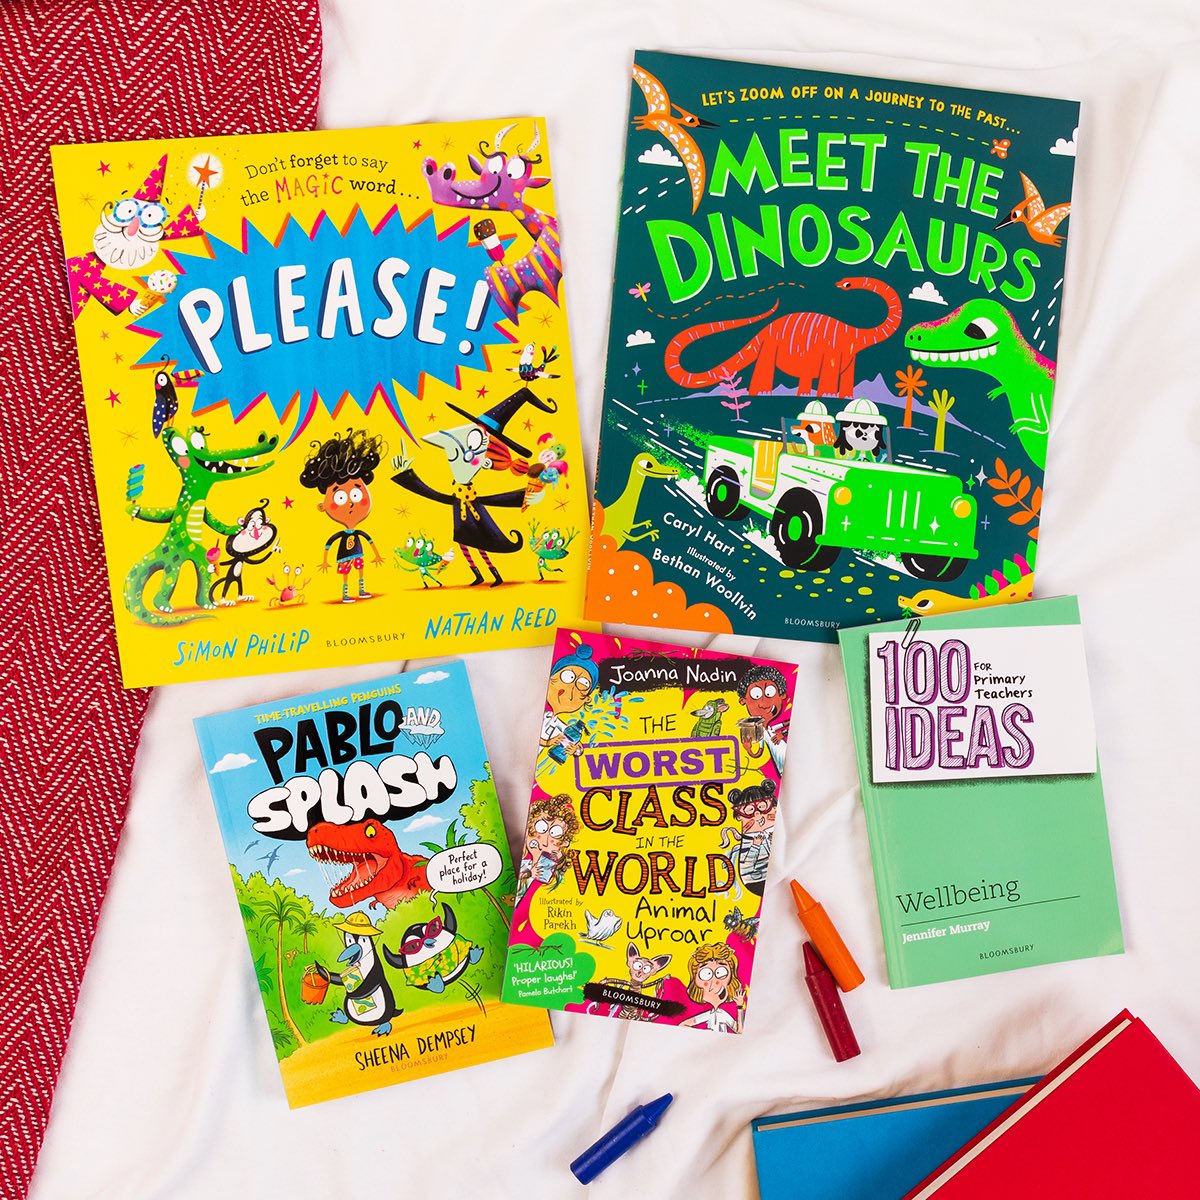 Happy publication day to our brilliant authors and illustrators! What January book treats do we have brand-new and out TODAY?! 📚 @siphilipstories @NathanReed_Illo @carylhart1 @bethanwoollvin @SheenaDempsey @joannanadin @r1k1n @MissJGM